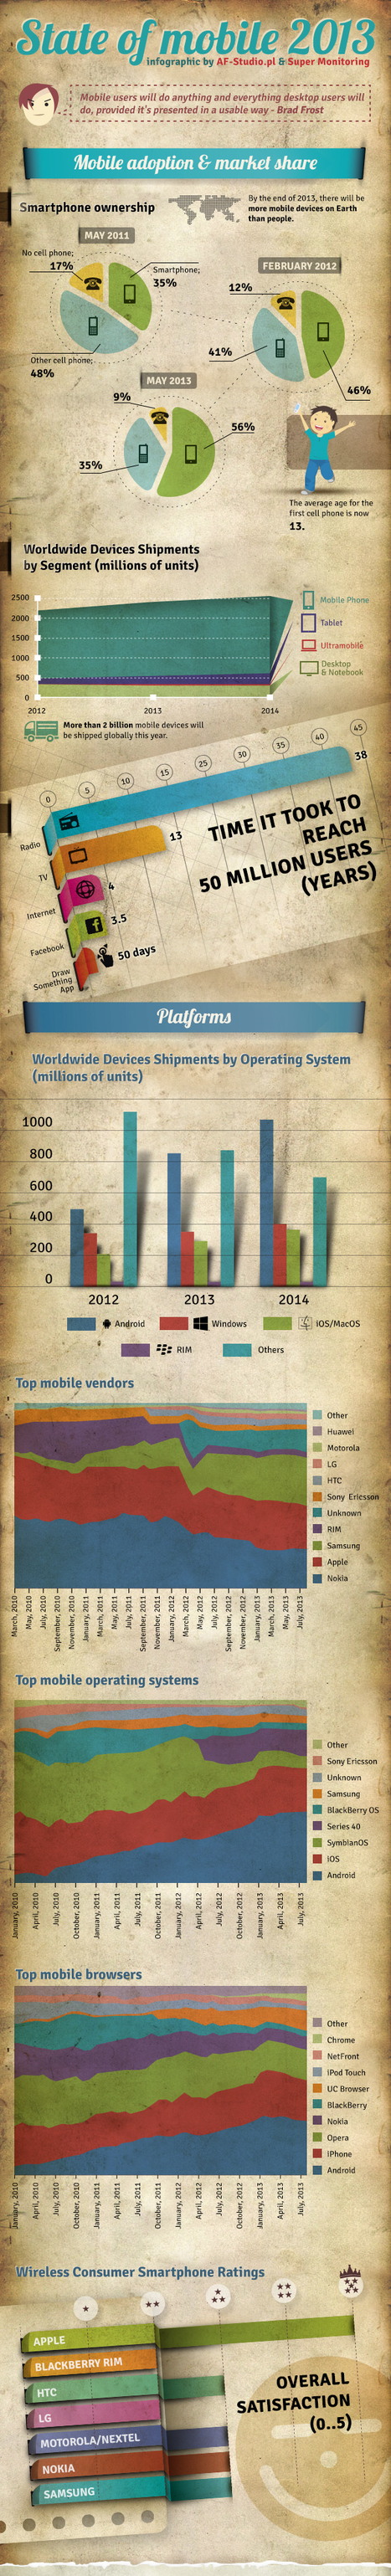 Infographic: Everything You Need to Know About Mobile in 2013 | Pédagogie & Technologie | Scoop.it